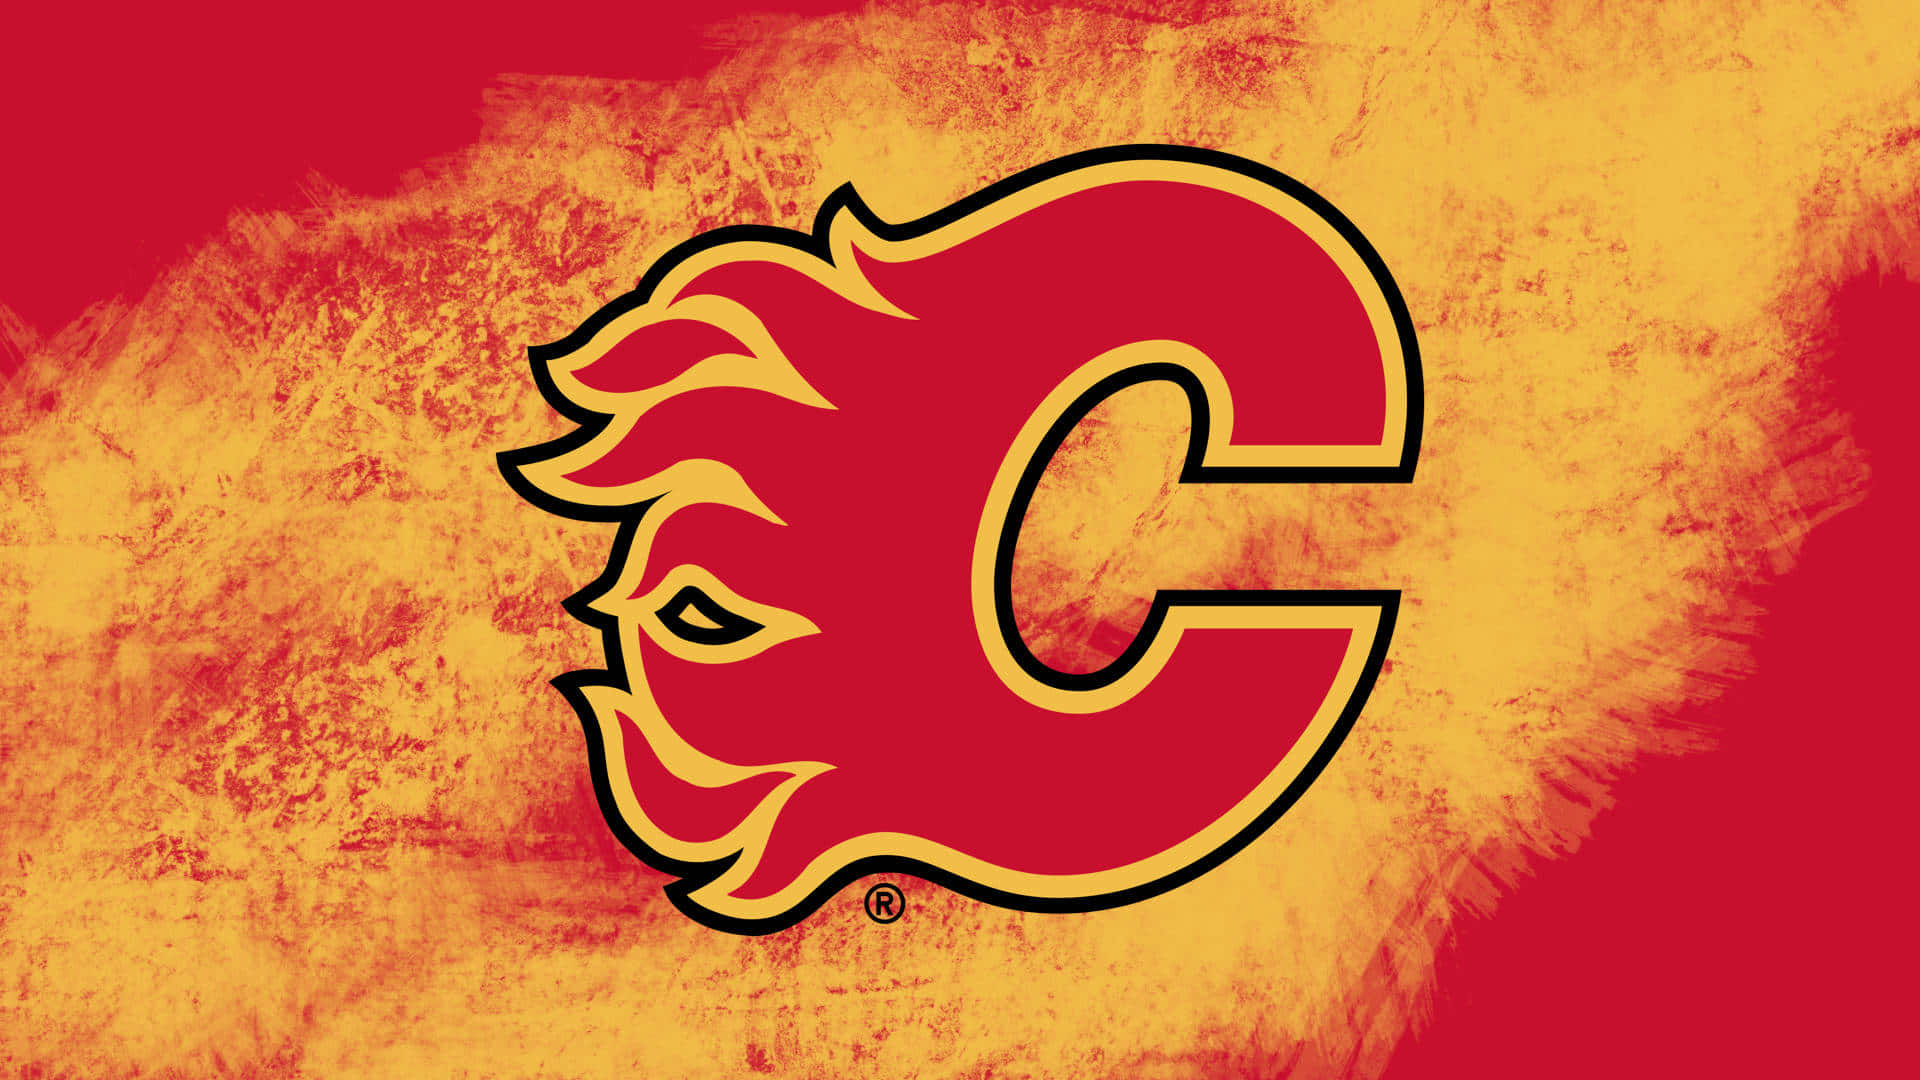 Brighten up Your Screen with the Calgary Flames Hockey Team.